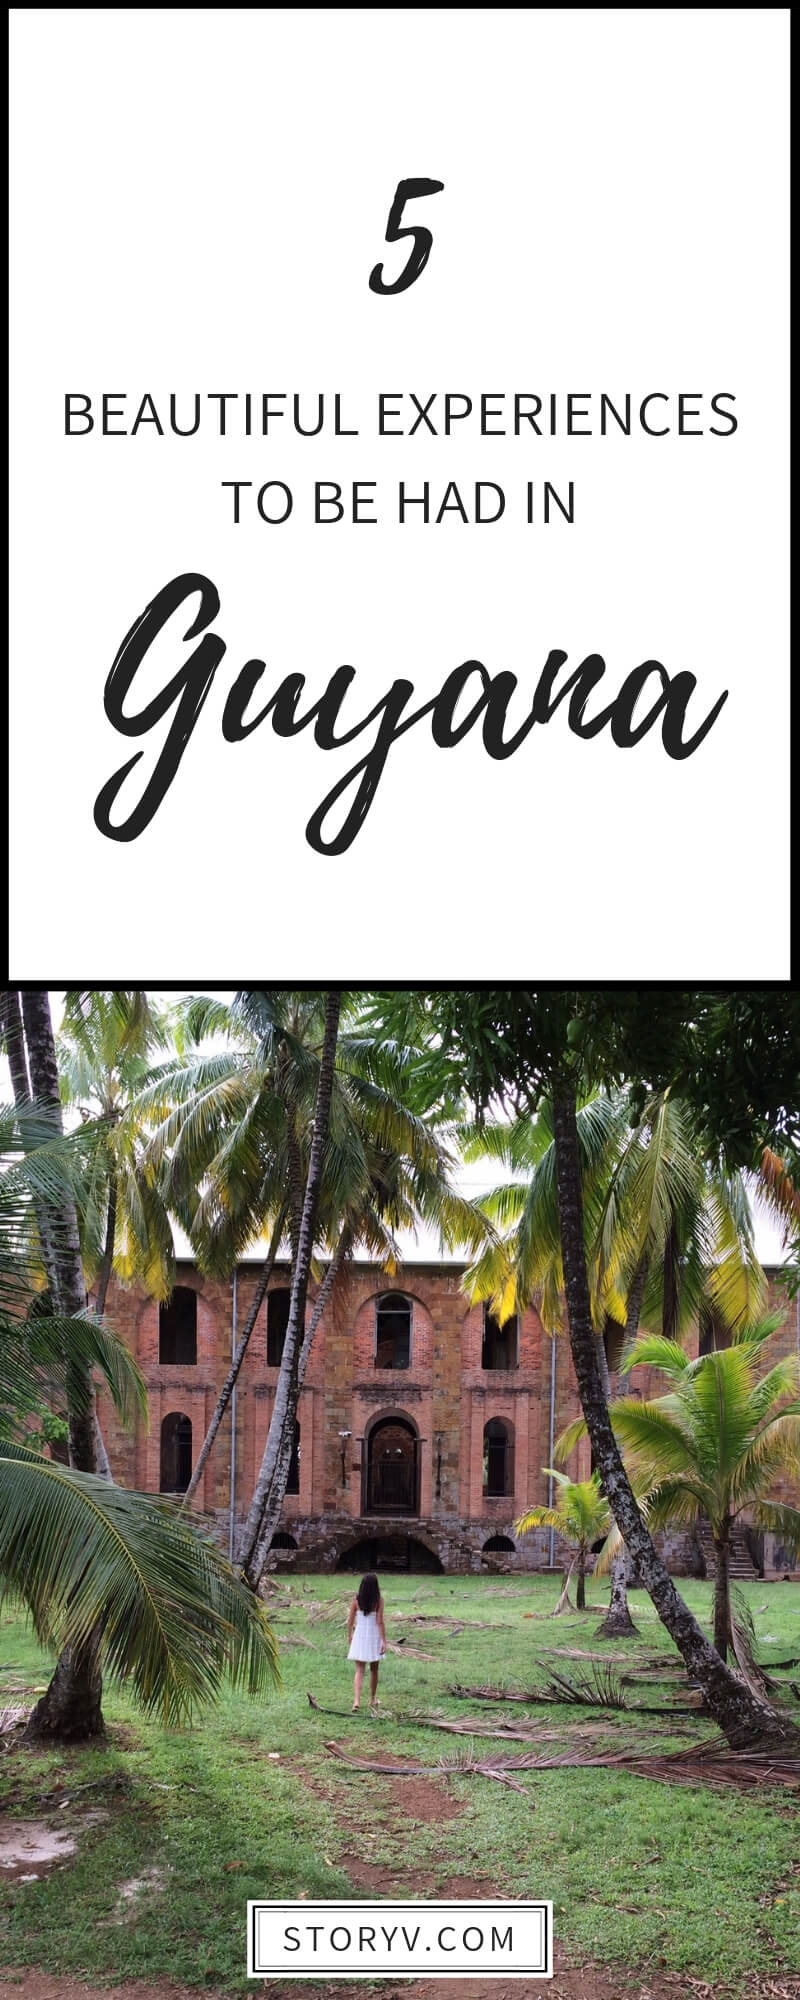 Whether you're looking for thrill-seeking adventure, beautiful scenery or a taste of the local way of life, Guyana has it all. Here's why you should pack your bags and head to Guyana for you next trip abroad...